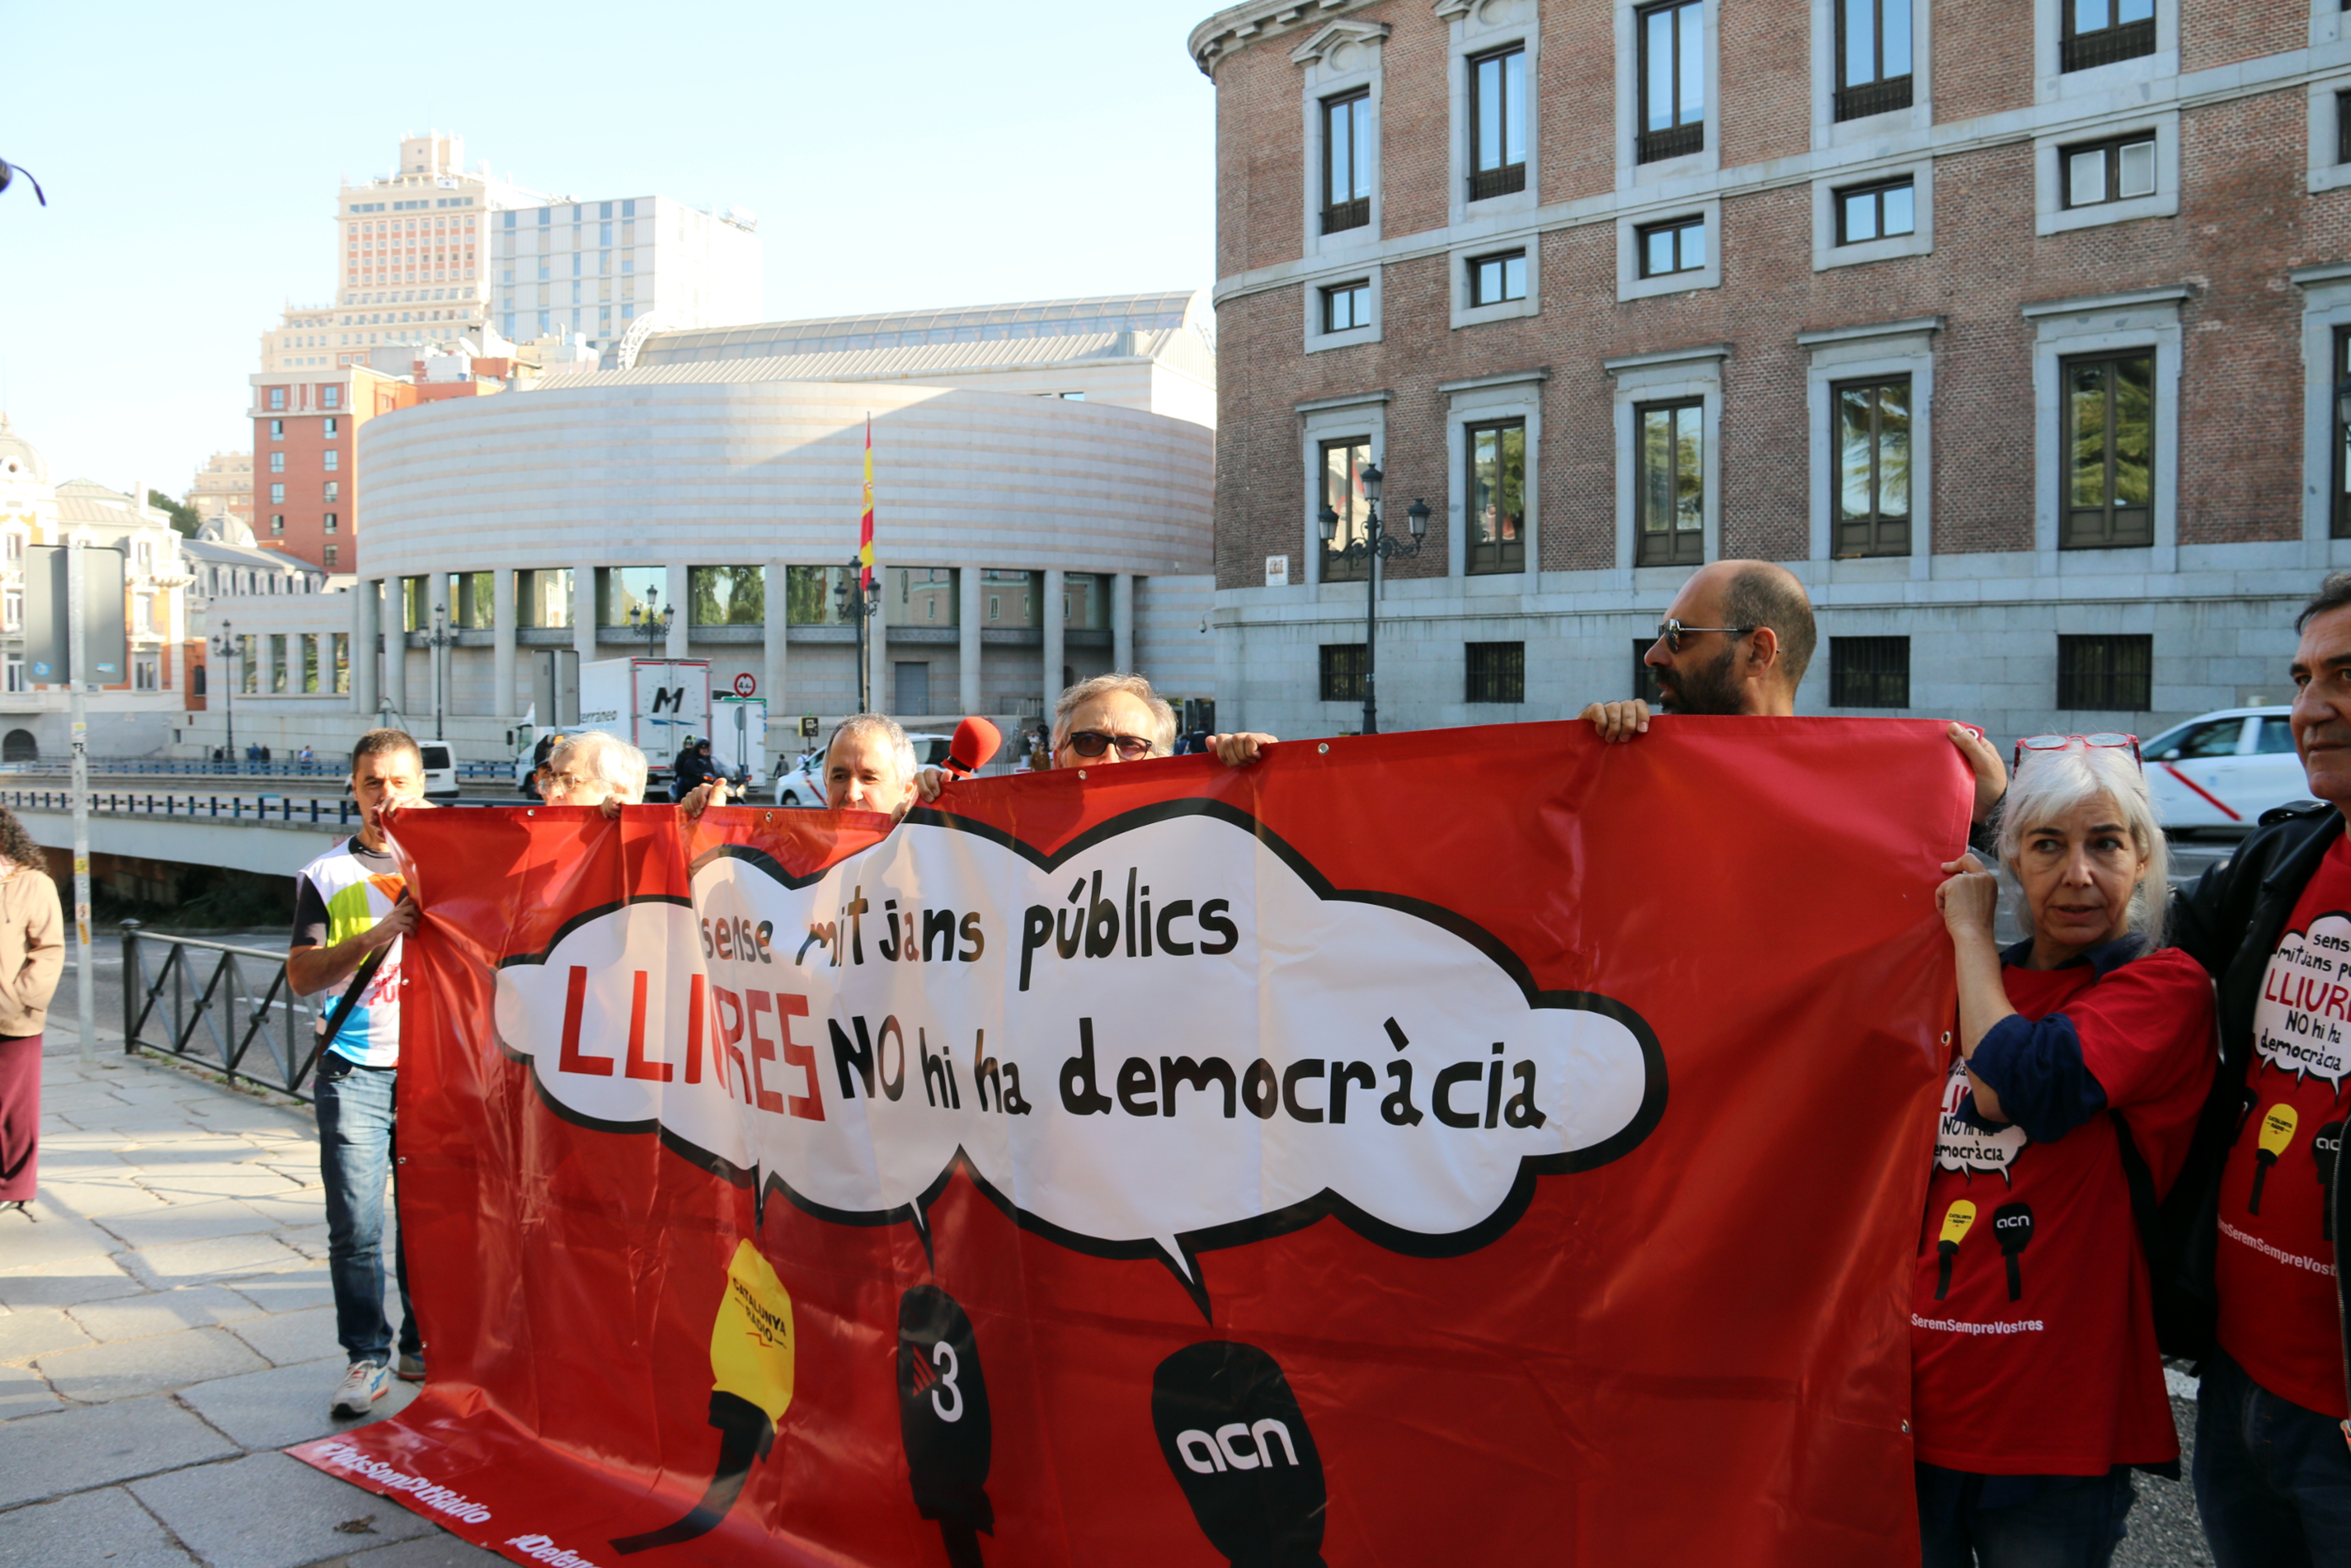 Catalan public broadcaster workers demonstrate to prostest against the takeover of Catalan public media (by José Soler)